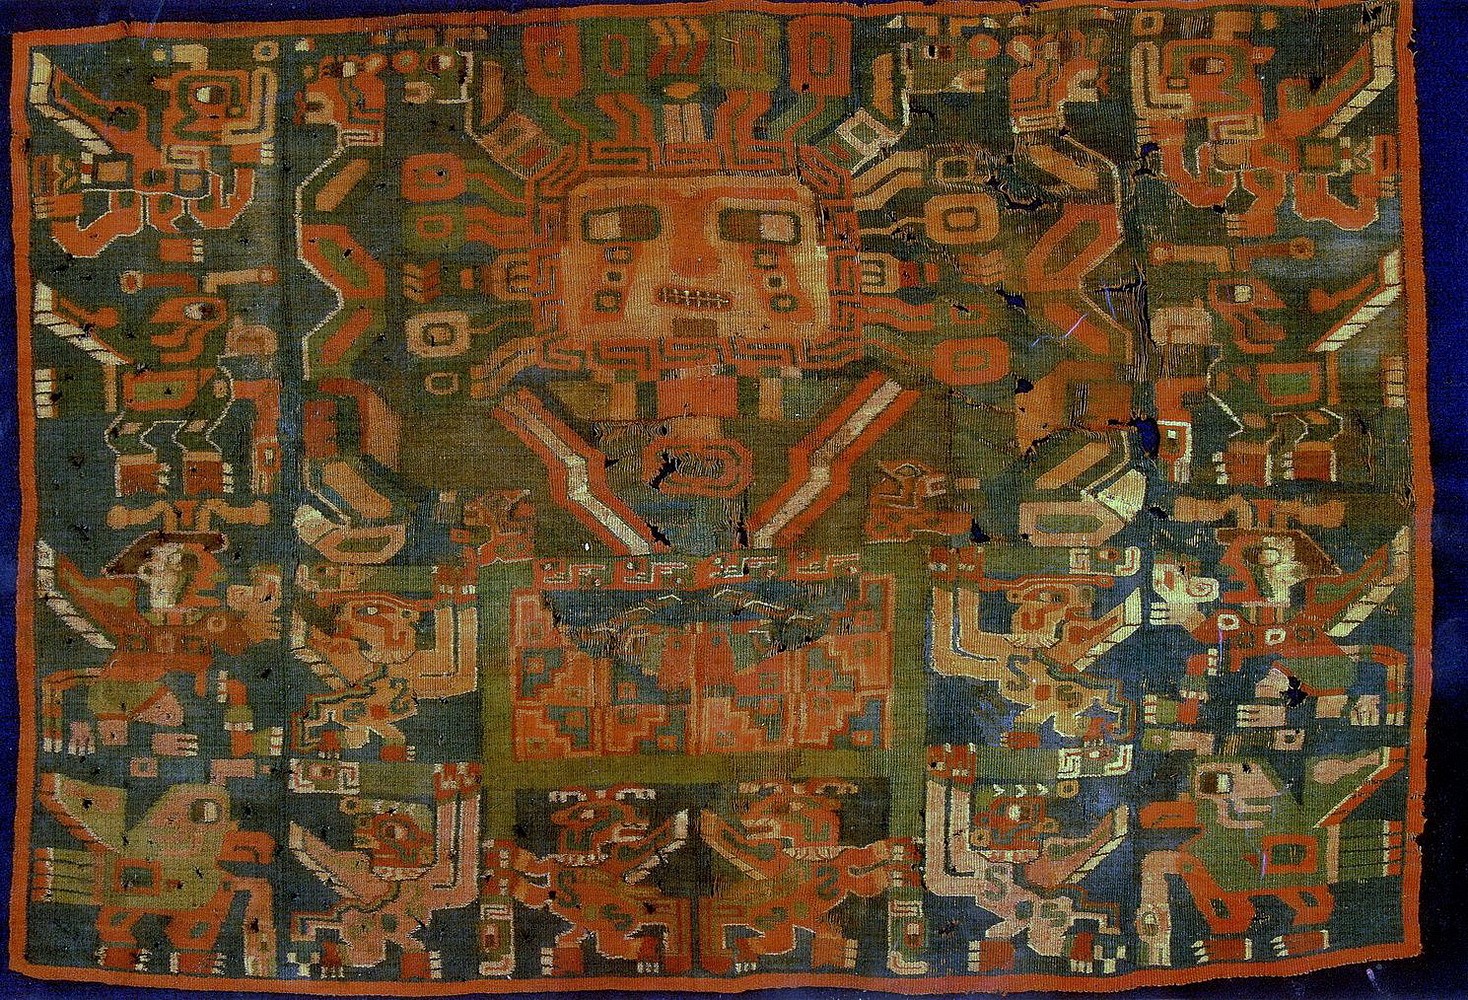 Peru, Sihuas Tapestry Panel Depicting a Sun Face Deity Holding a Staff in Each Hand
The panel depicts an elaborate Sun Face Deity holding fancy staffs with Puma heads in profile.  The Deity wears a colorful headdress and an unusual chest decoration.  Beneath the deity is a litter held by four attendants.  In the center of the litter is a self-referential depiction of a tunic.  Underneath the litter are two staff bearers that appear in front of the litter.  On each side is a column of four unique kneeling anthropomorphized attendants with bird-like characteristics. Among the attendants are two figures with human faces who are blowing conch trumpets. A similar, less complicated example is illustrated in TIWANAKU: ANCESTORS OF THE INKA by Maragaret Young-Sanchez, fig. 1.9.
Condition: There are losses and repairs throughout.
Media: Textile
Dimensions: Height: 20" x Width: 29"
$18,000
N6012